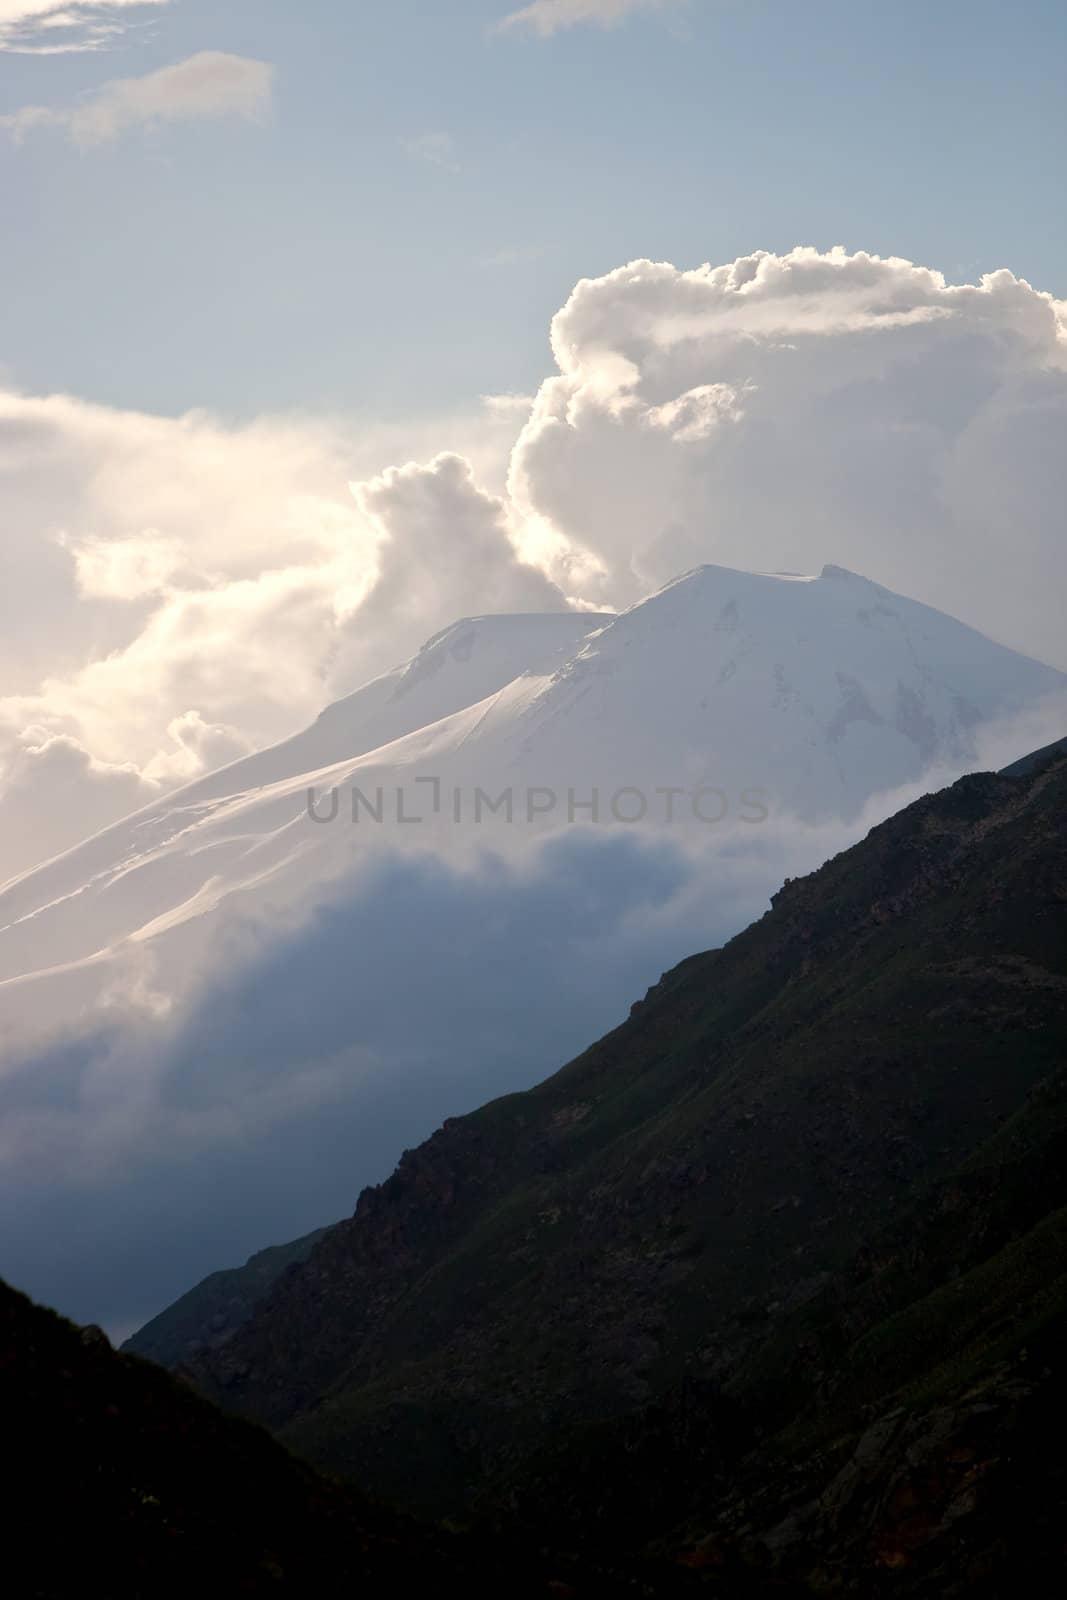 Clouds and Mountains, Caucasus Mountains Elbrus, Adilsu june 2010